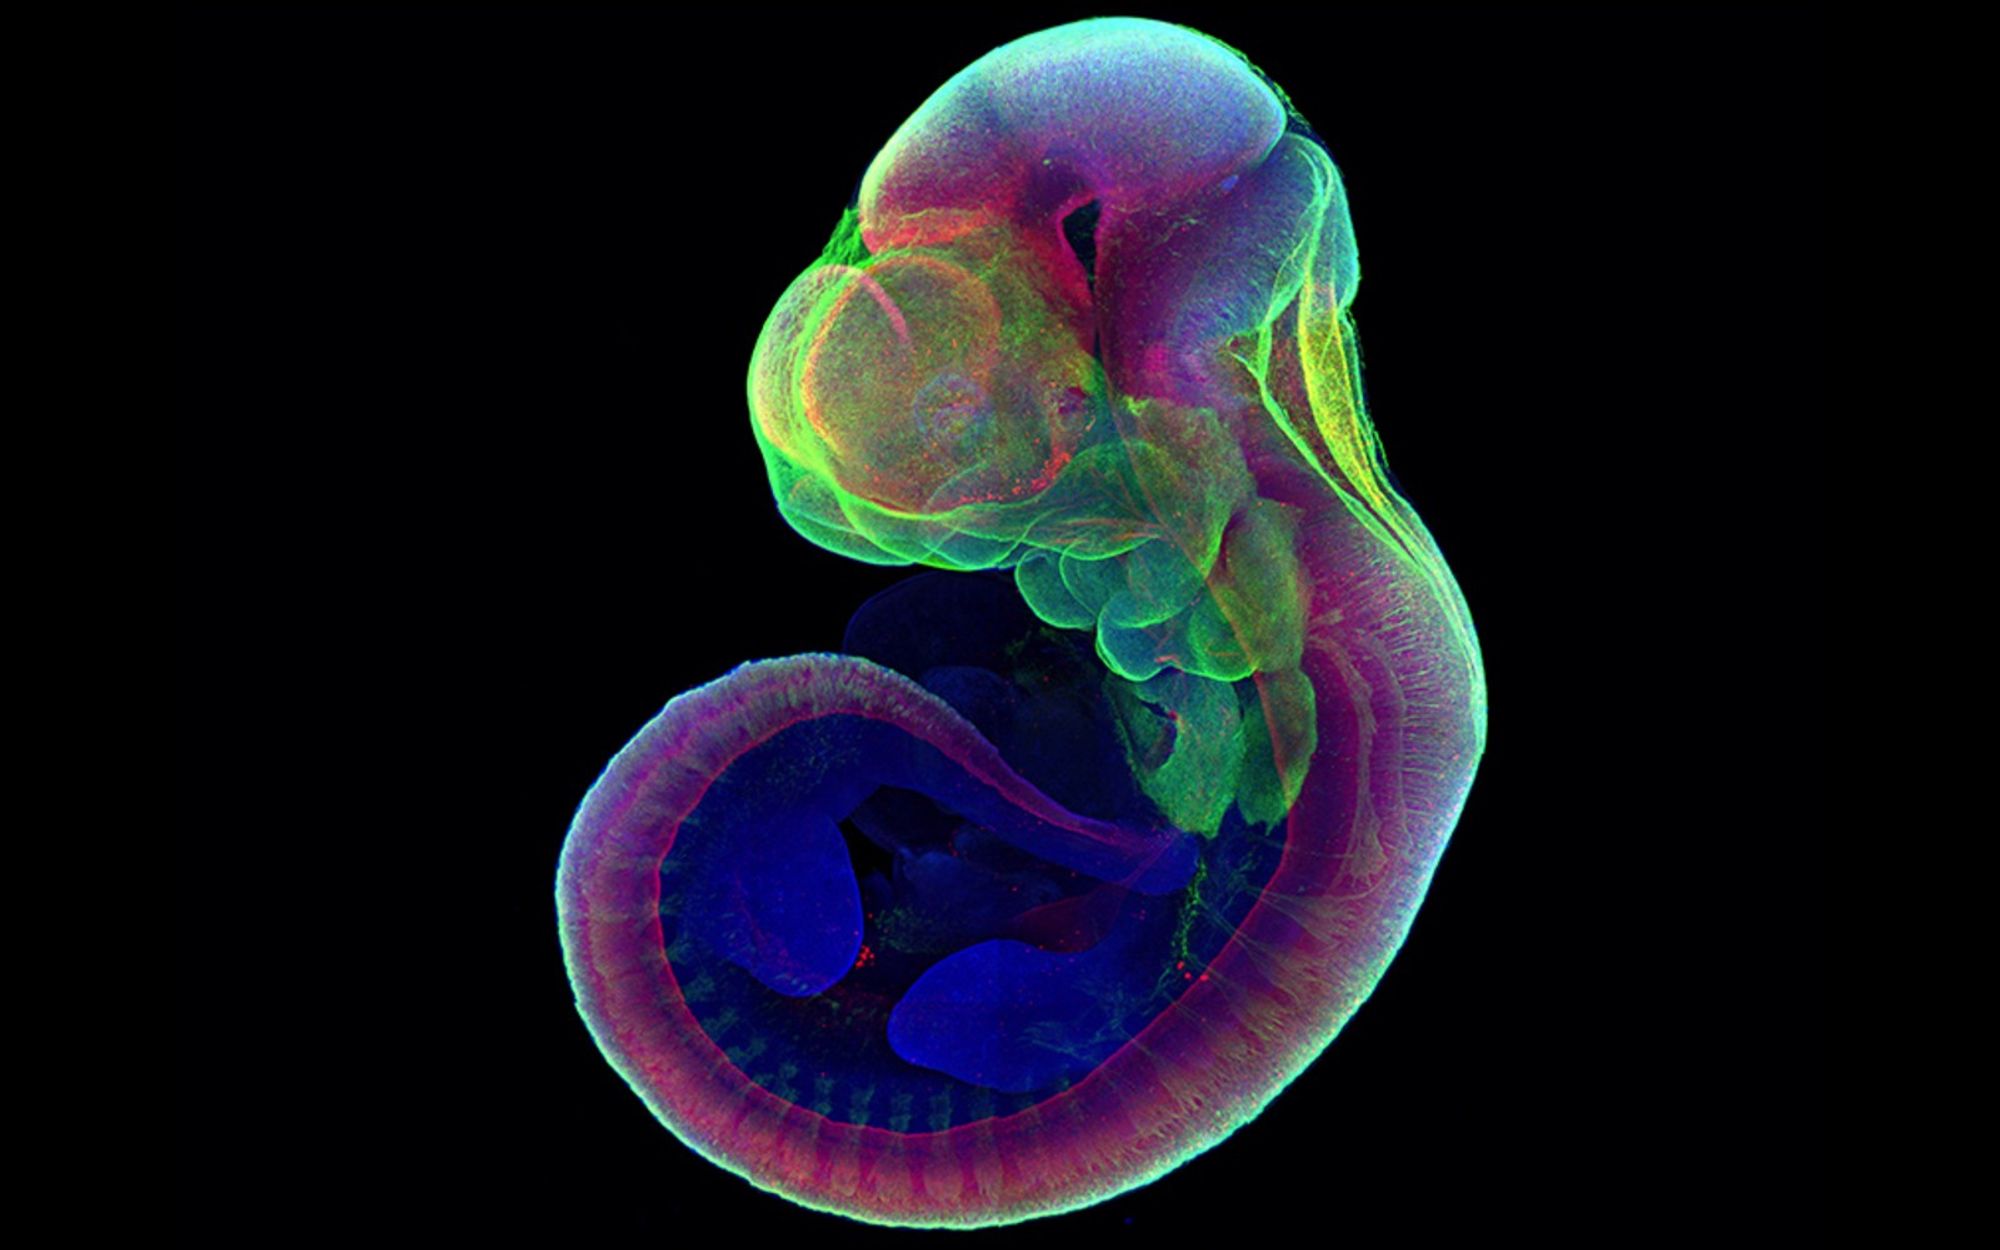 This mouse embryo grew in an artificial uterus